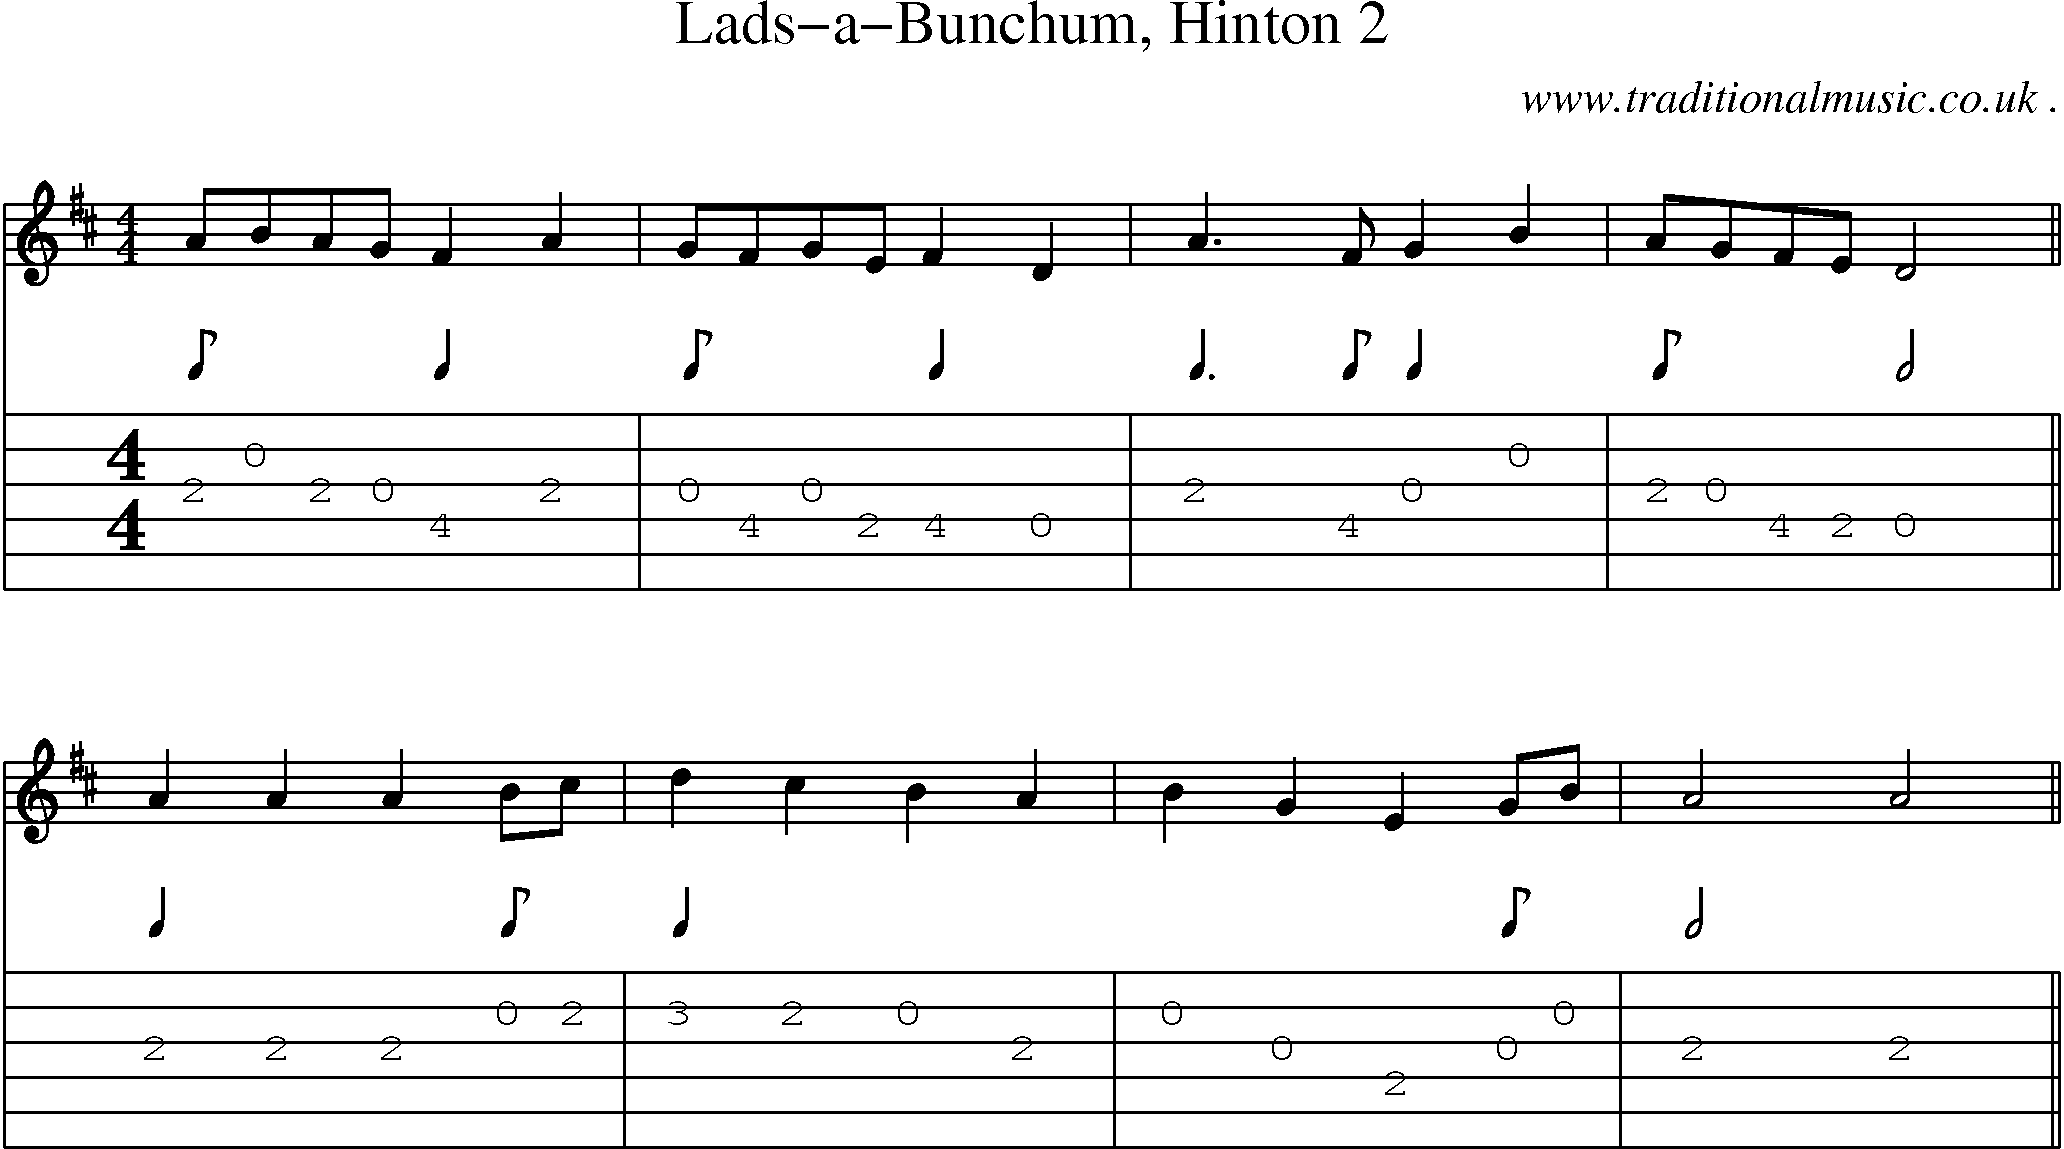 Sheet-Music and Guitar Tabs for Lads-a-bunchum Hinton 2